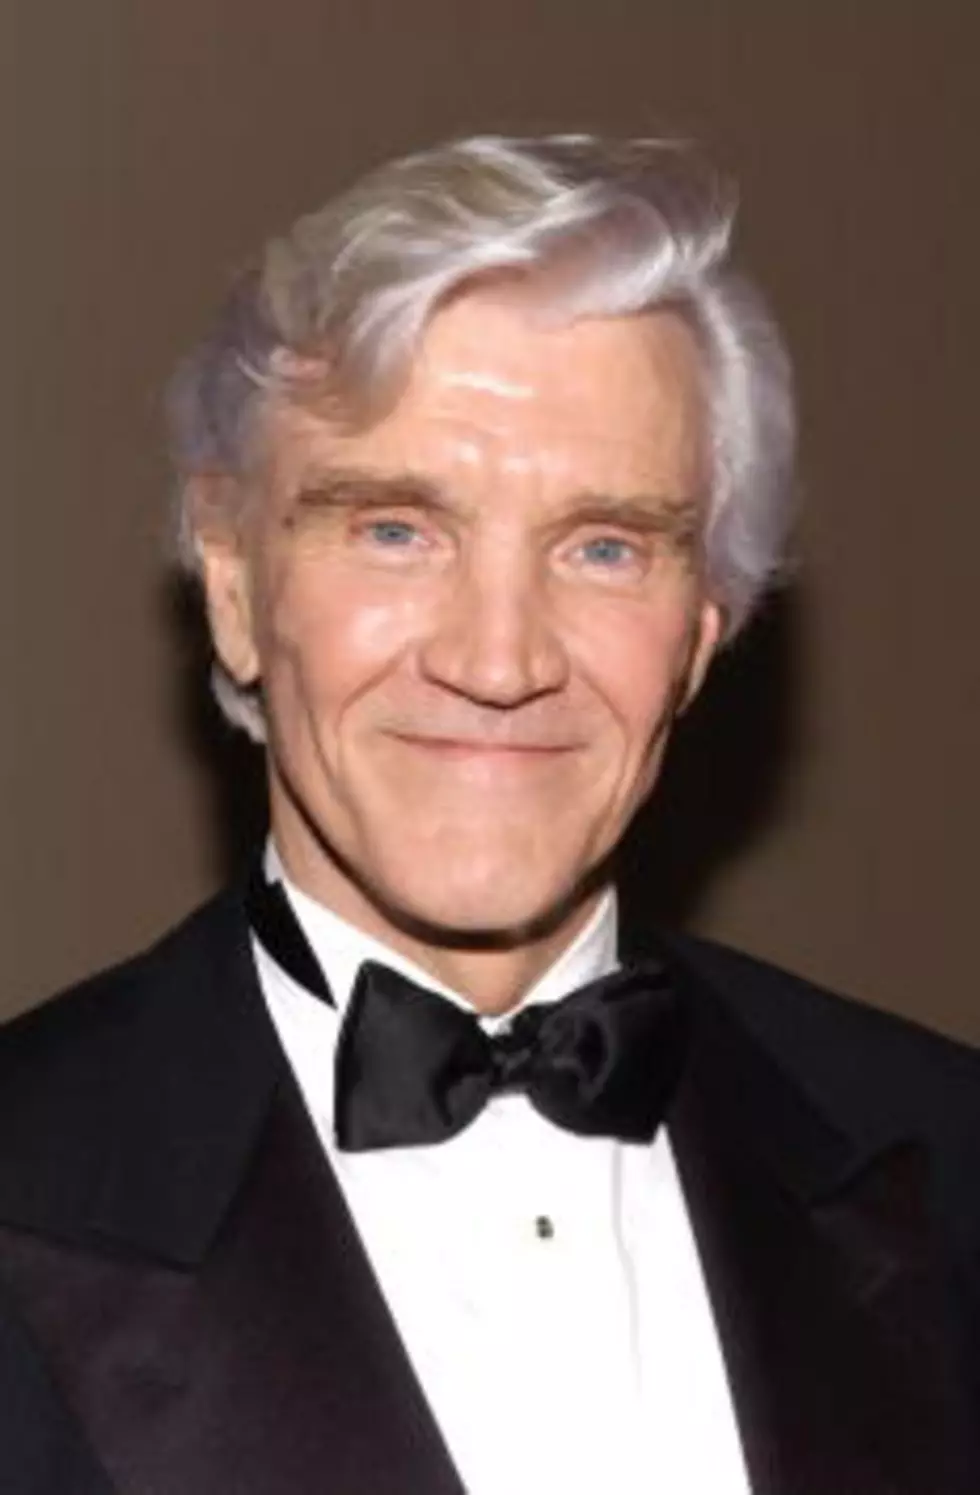 &#8216;All My Children&#8217; Star David Canary Dead at 77